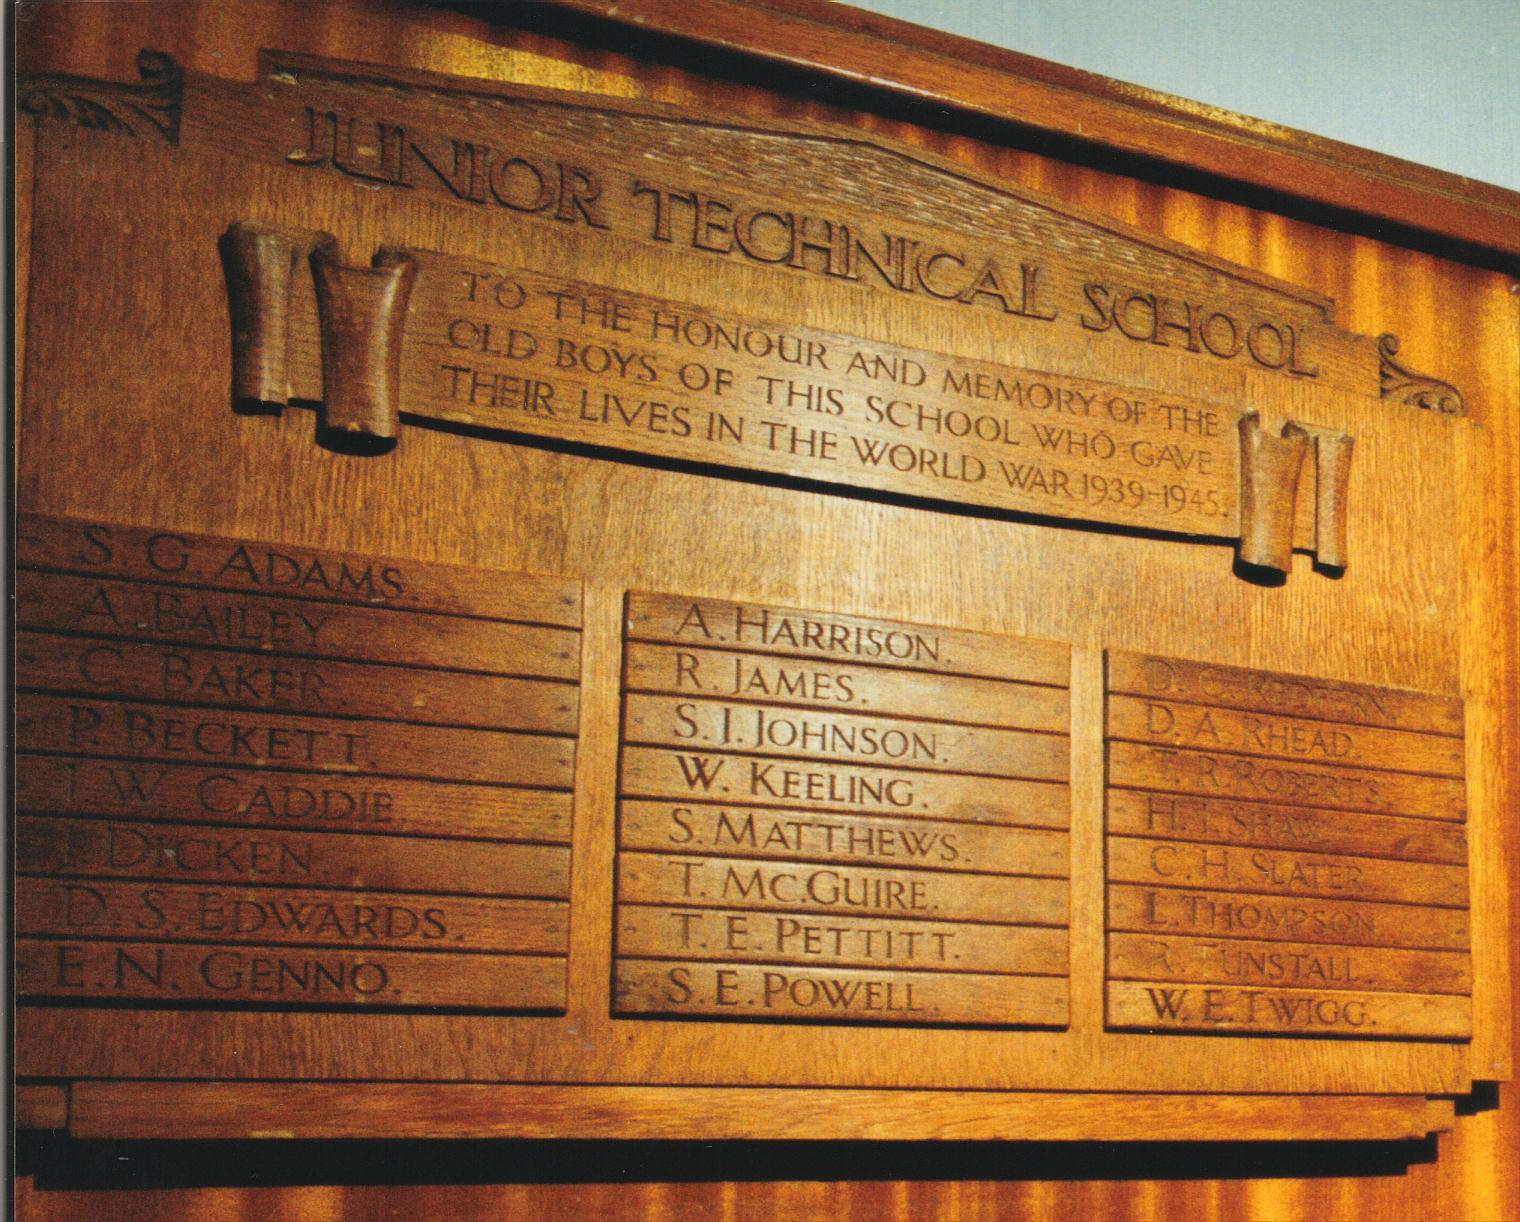 Picture of JTS Roll of Honour - Photo © The Sentinel - use magnifier for larger image